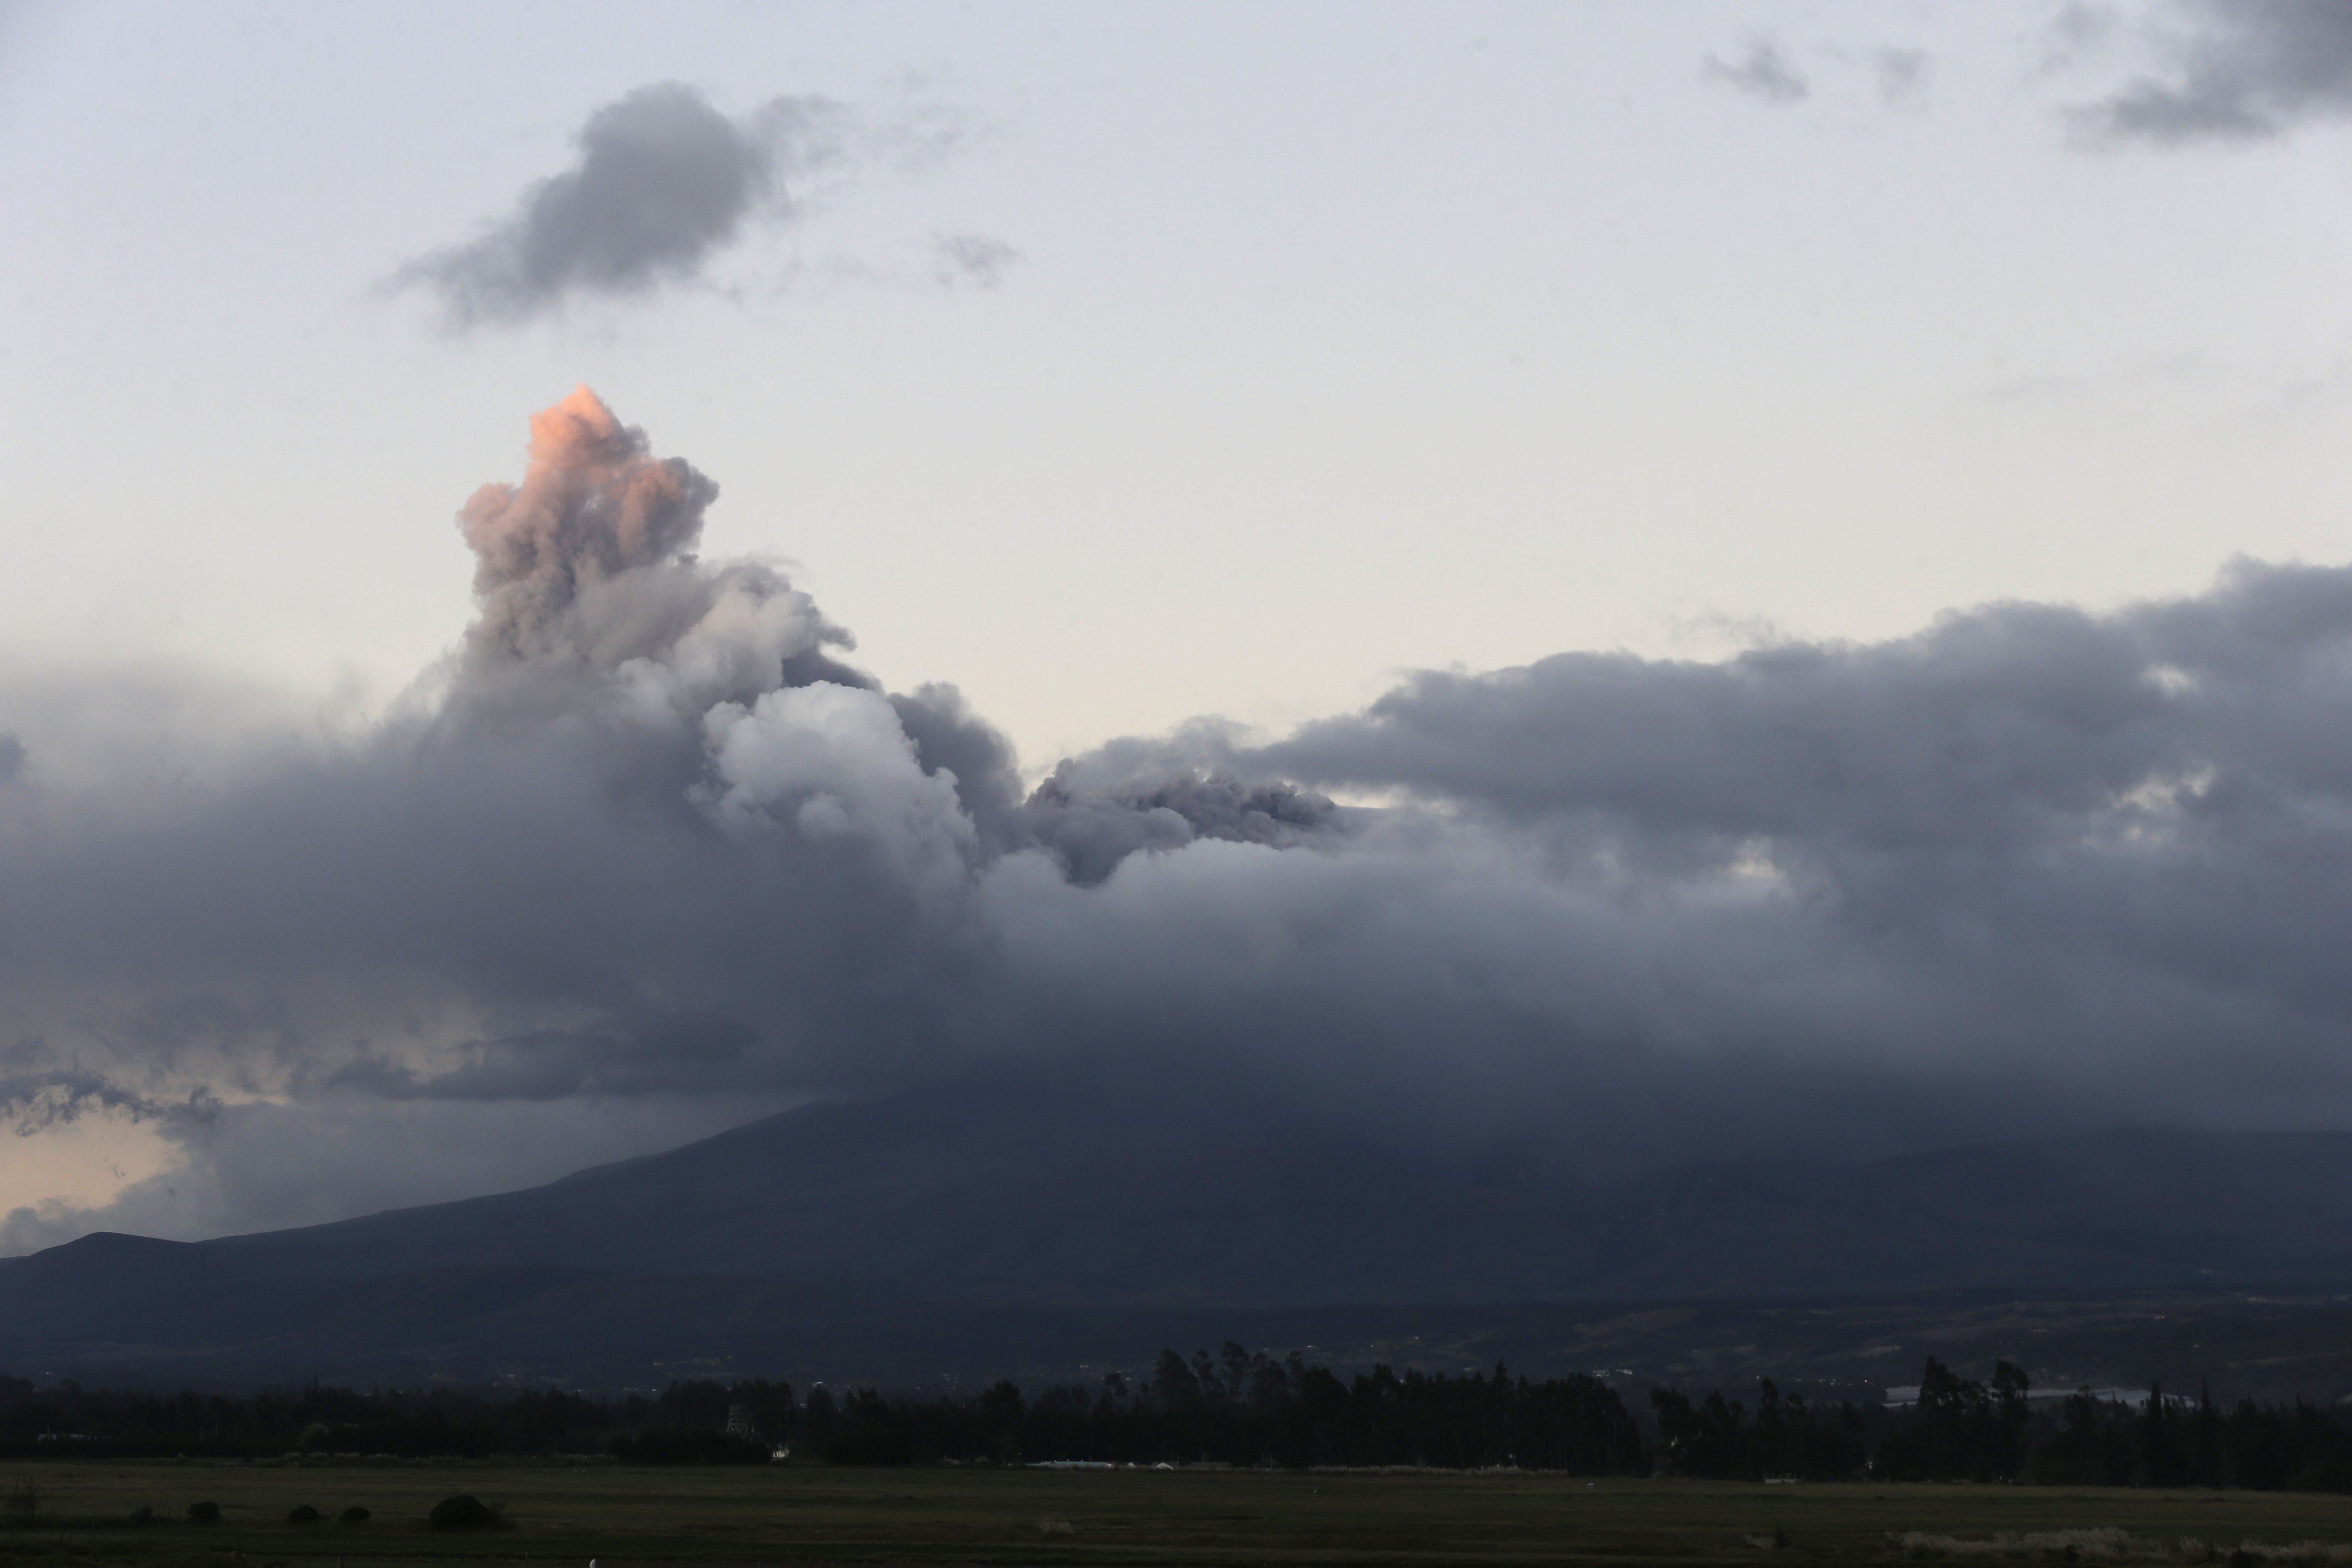 A view of Cotopaxi volcano spewing ashes as seen from Latacunga, Ecuador on Aug. 15, 2015. (Dolores Ochoa—AP)